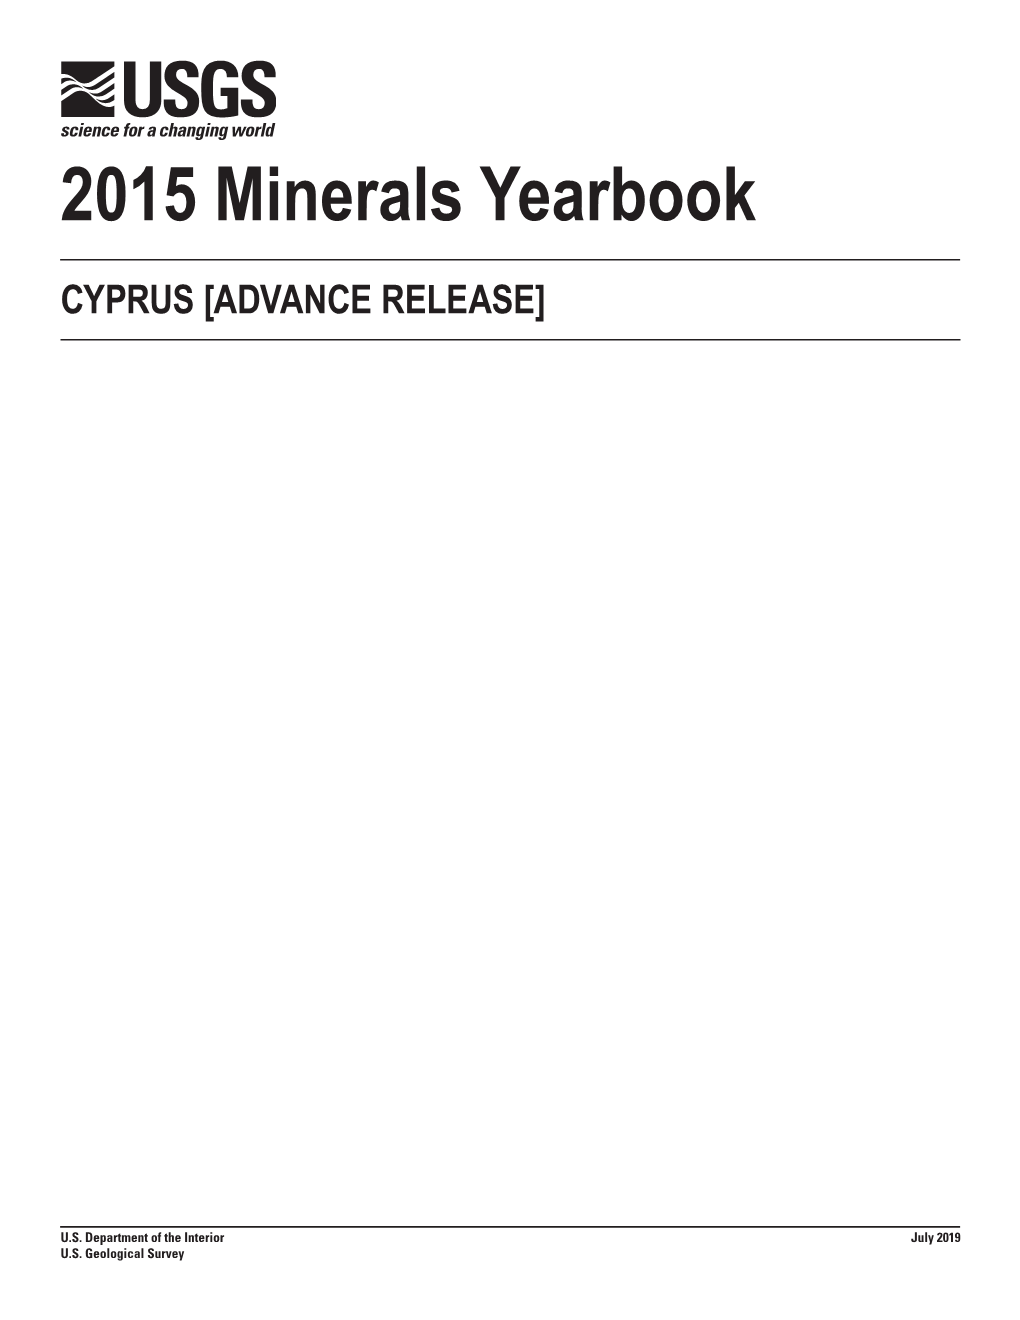 The Mineral Industry of Cyprus in 2015